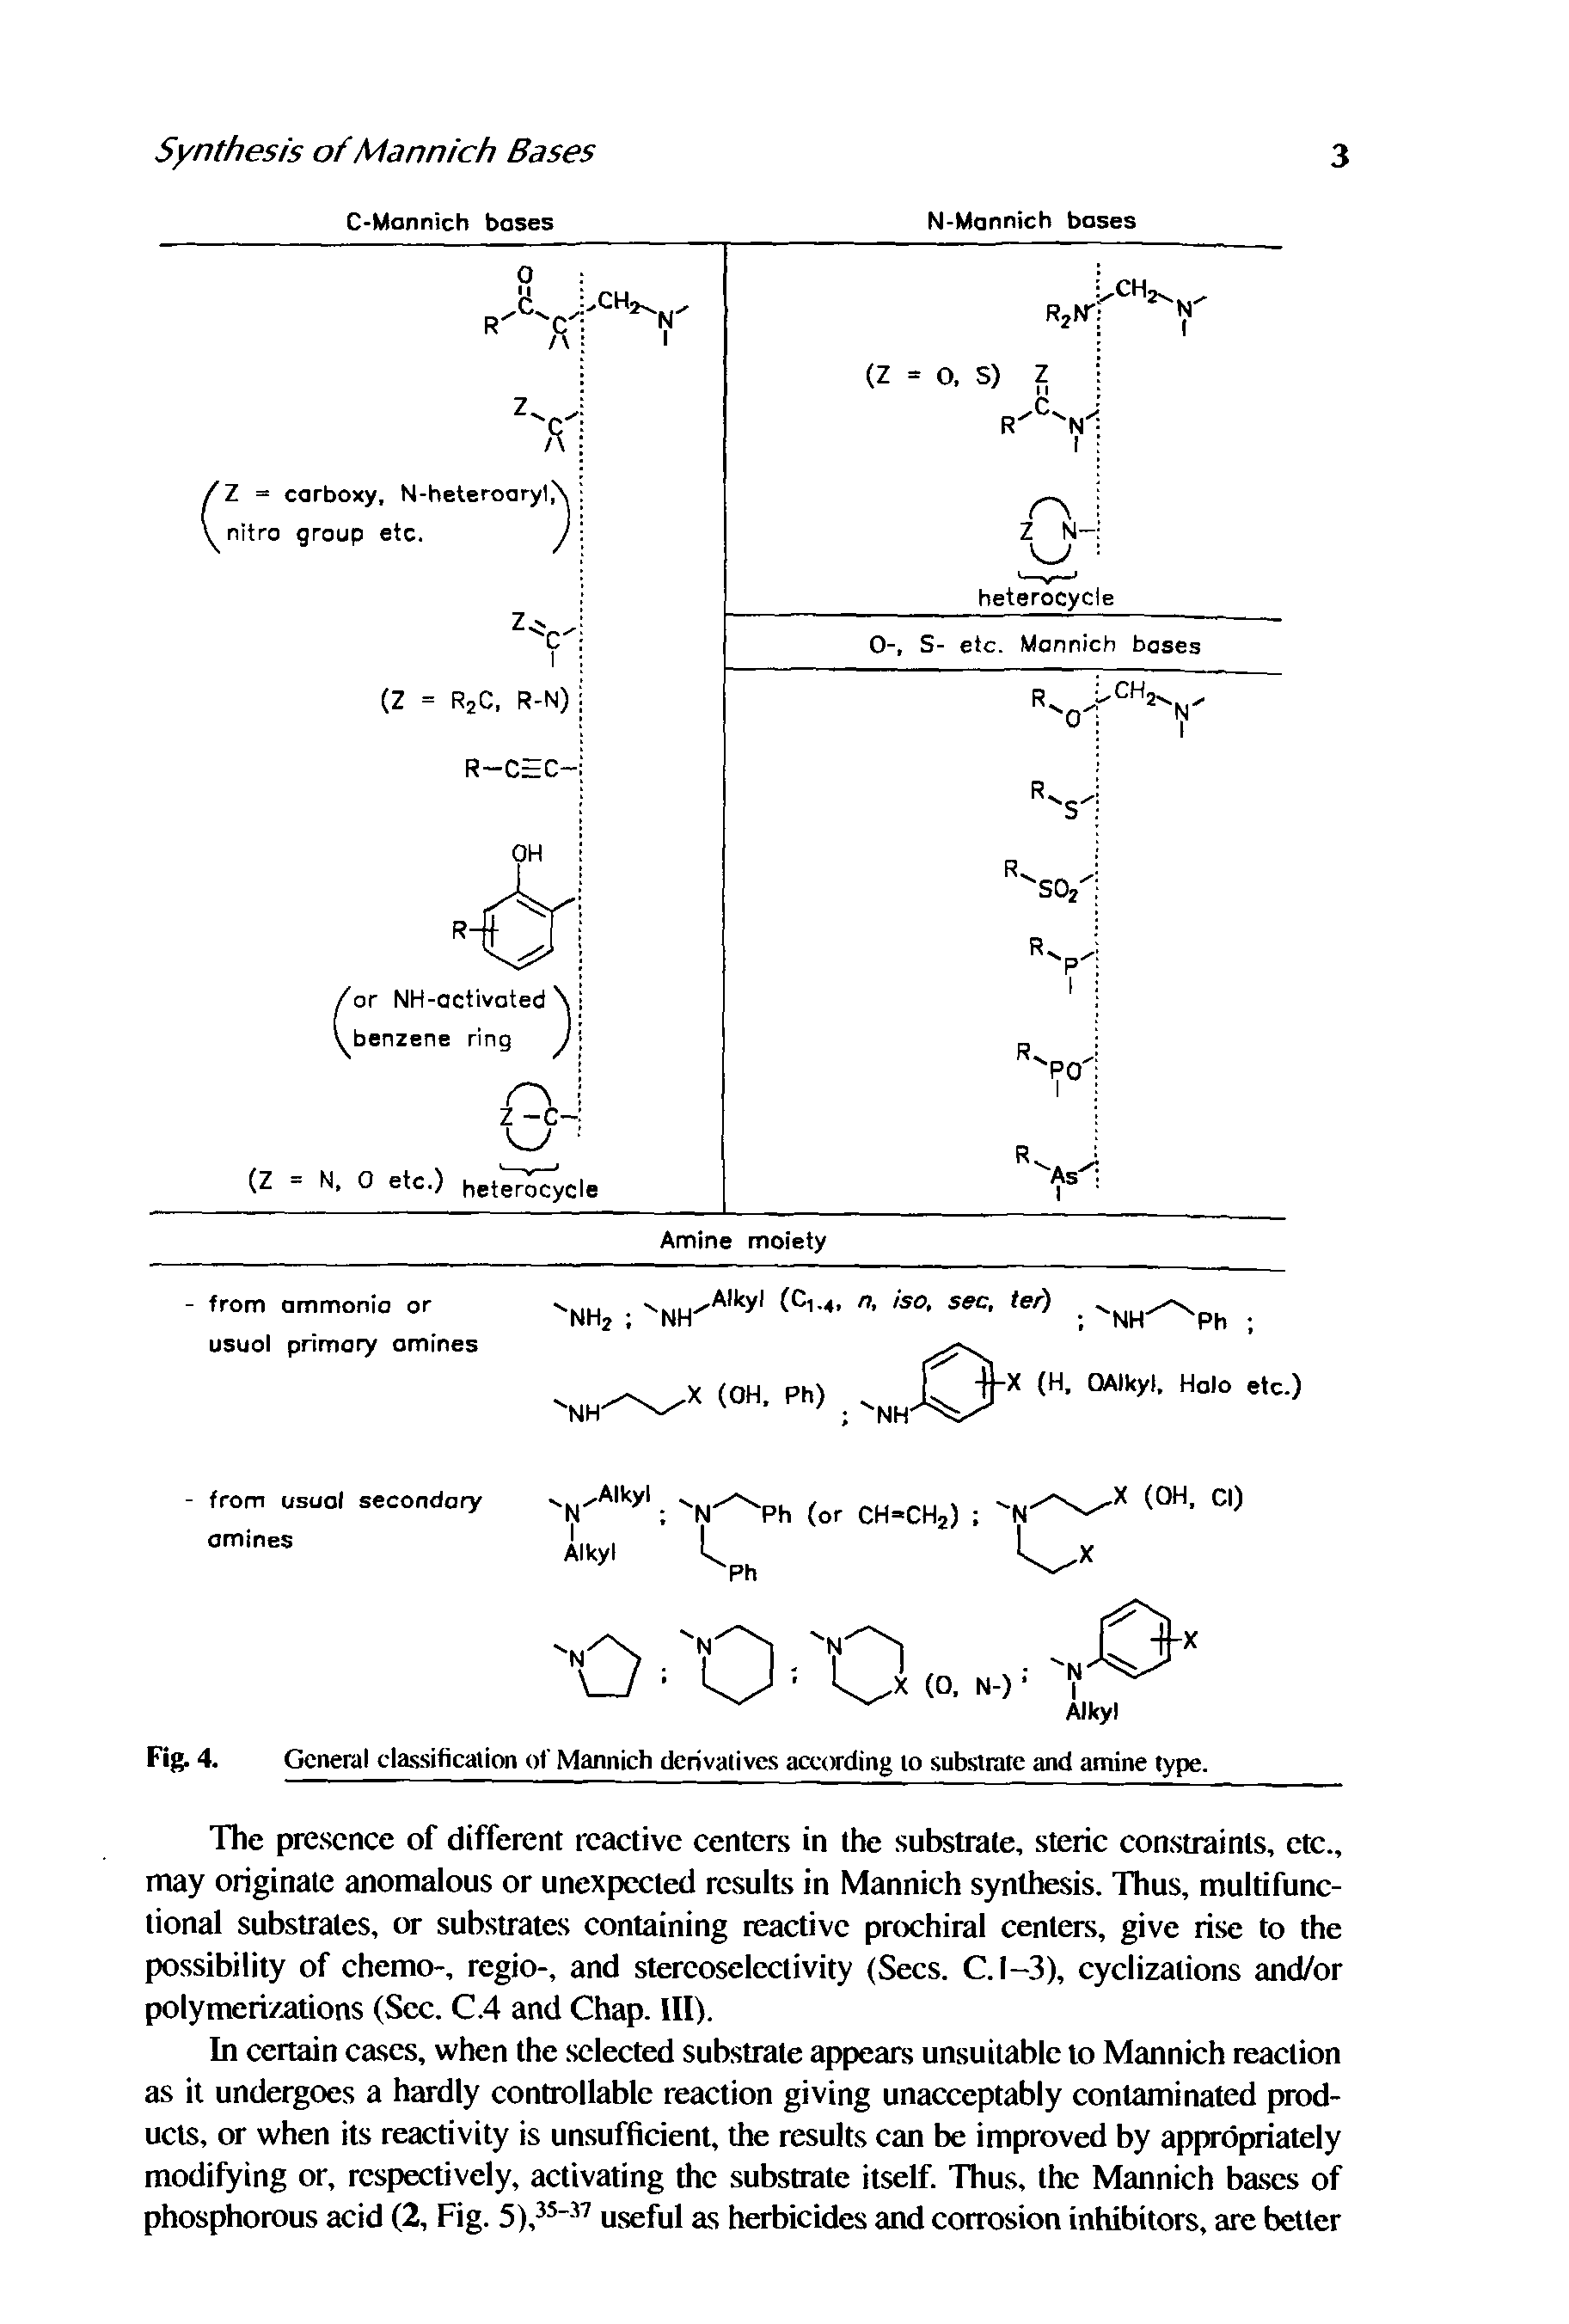 Fig. 4. General classification of Mannich derivatives according to substrate and amine type.